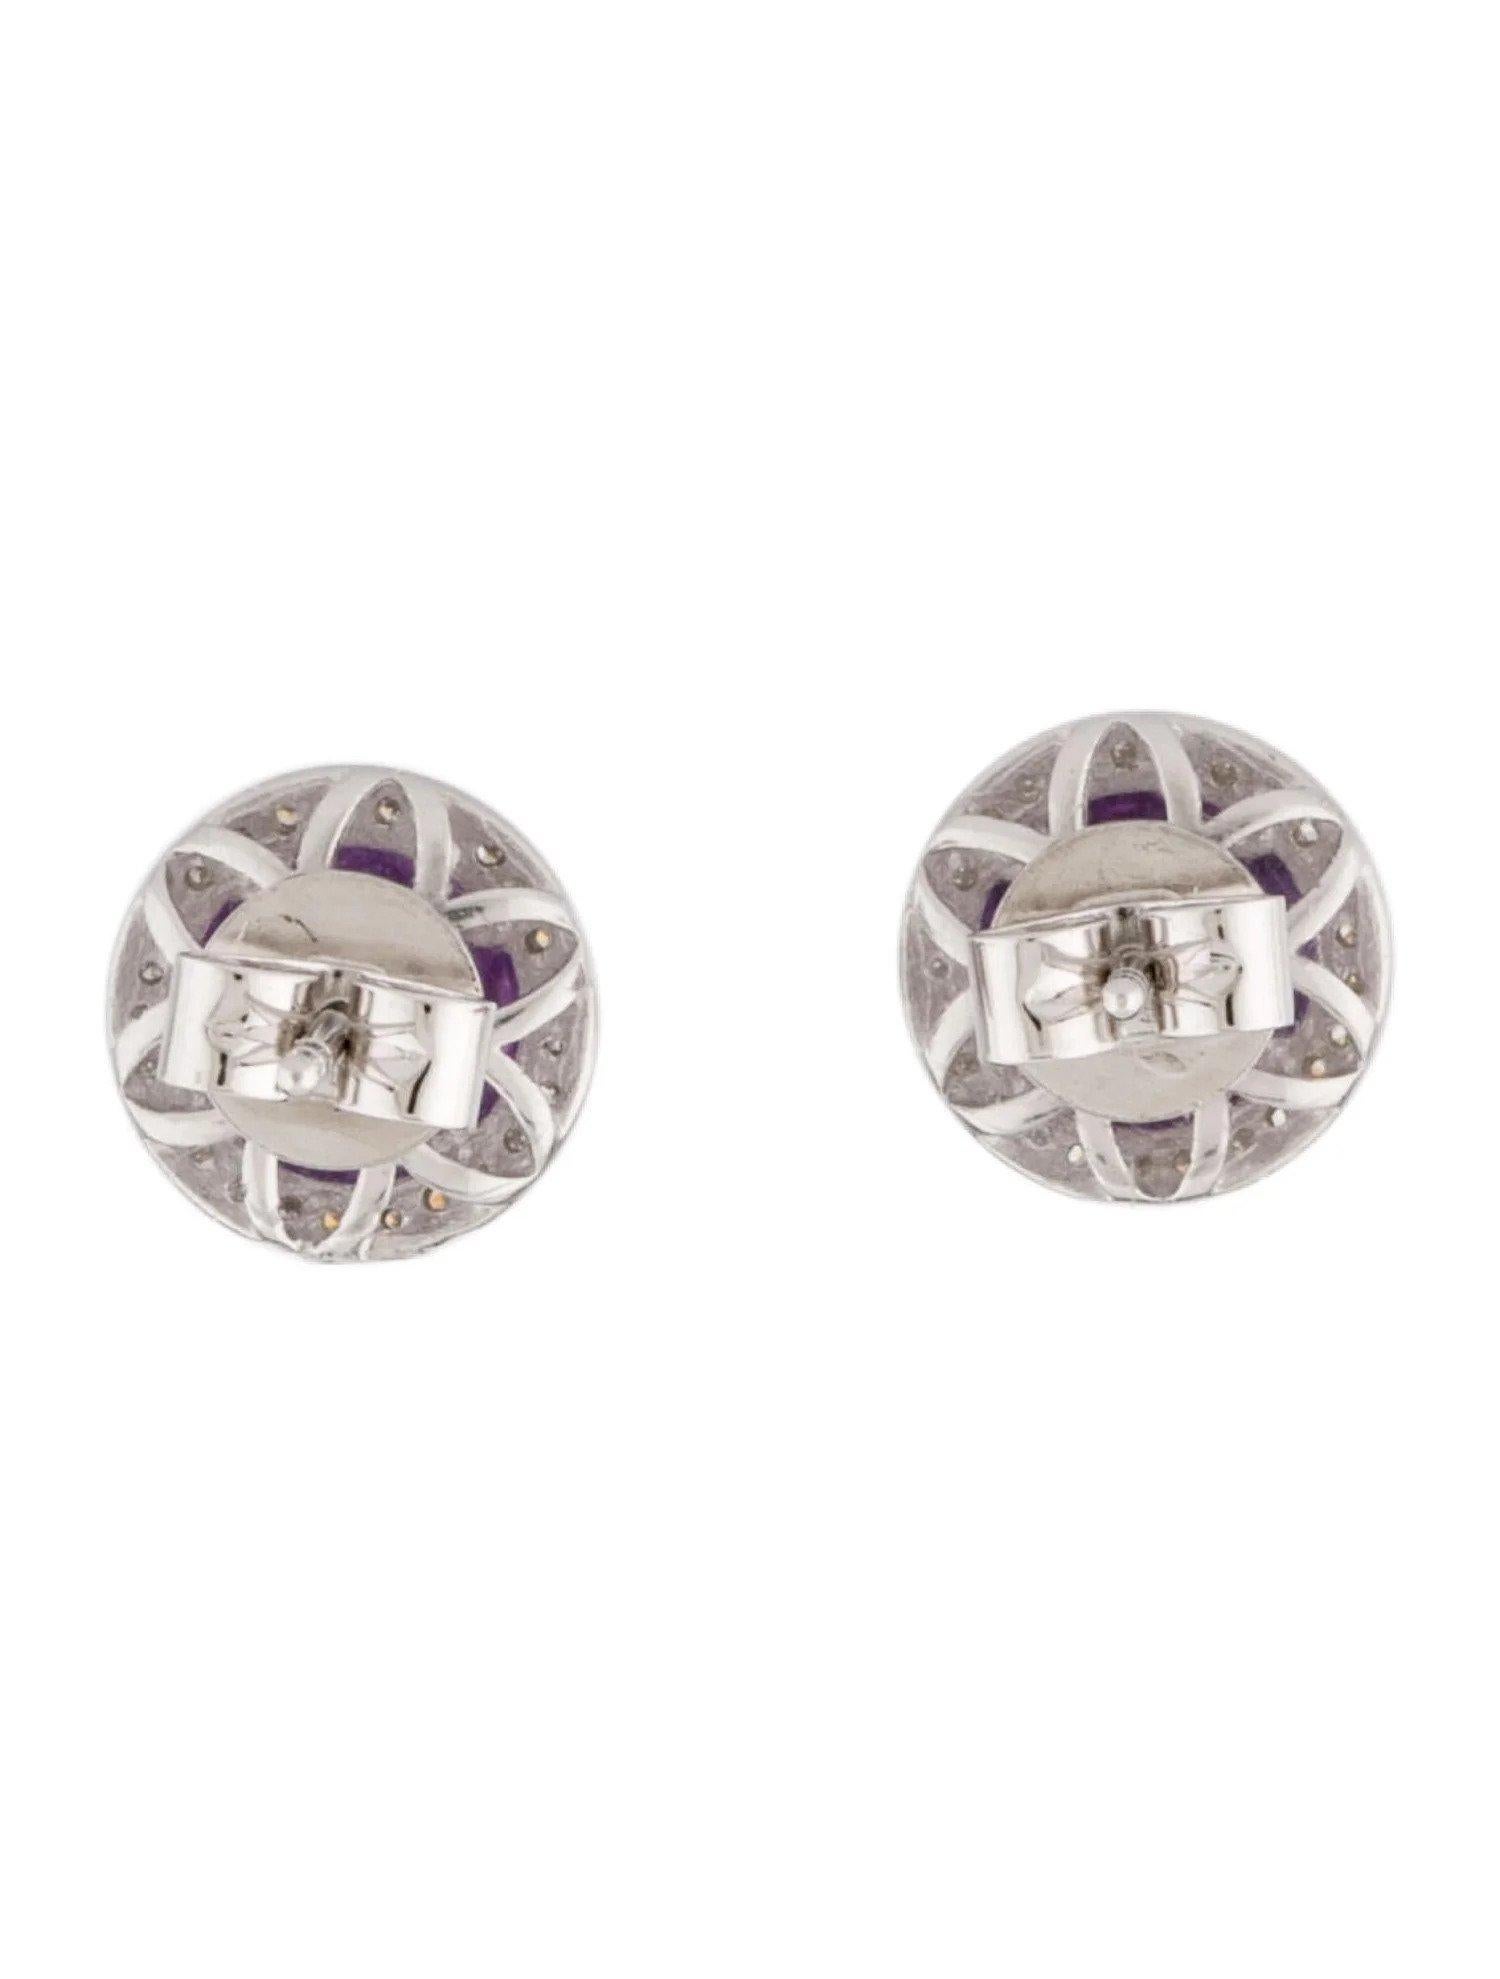 1.86 Carat Round Amethyst & Diamond White Gold Stud Earrings In New Condition For Sale In Great Neck, NY